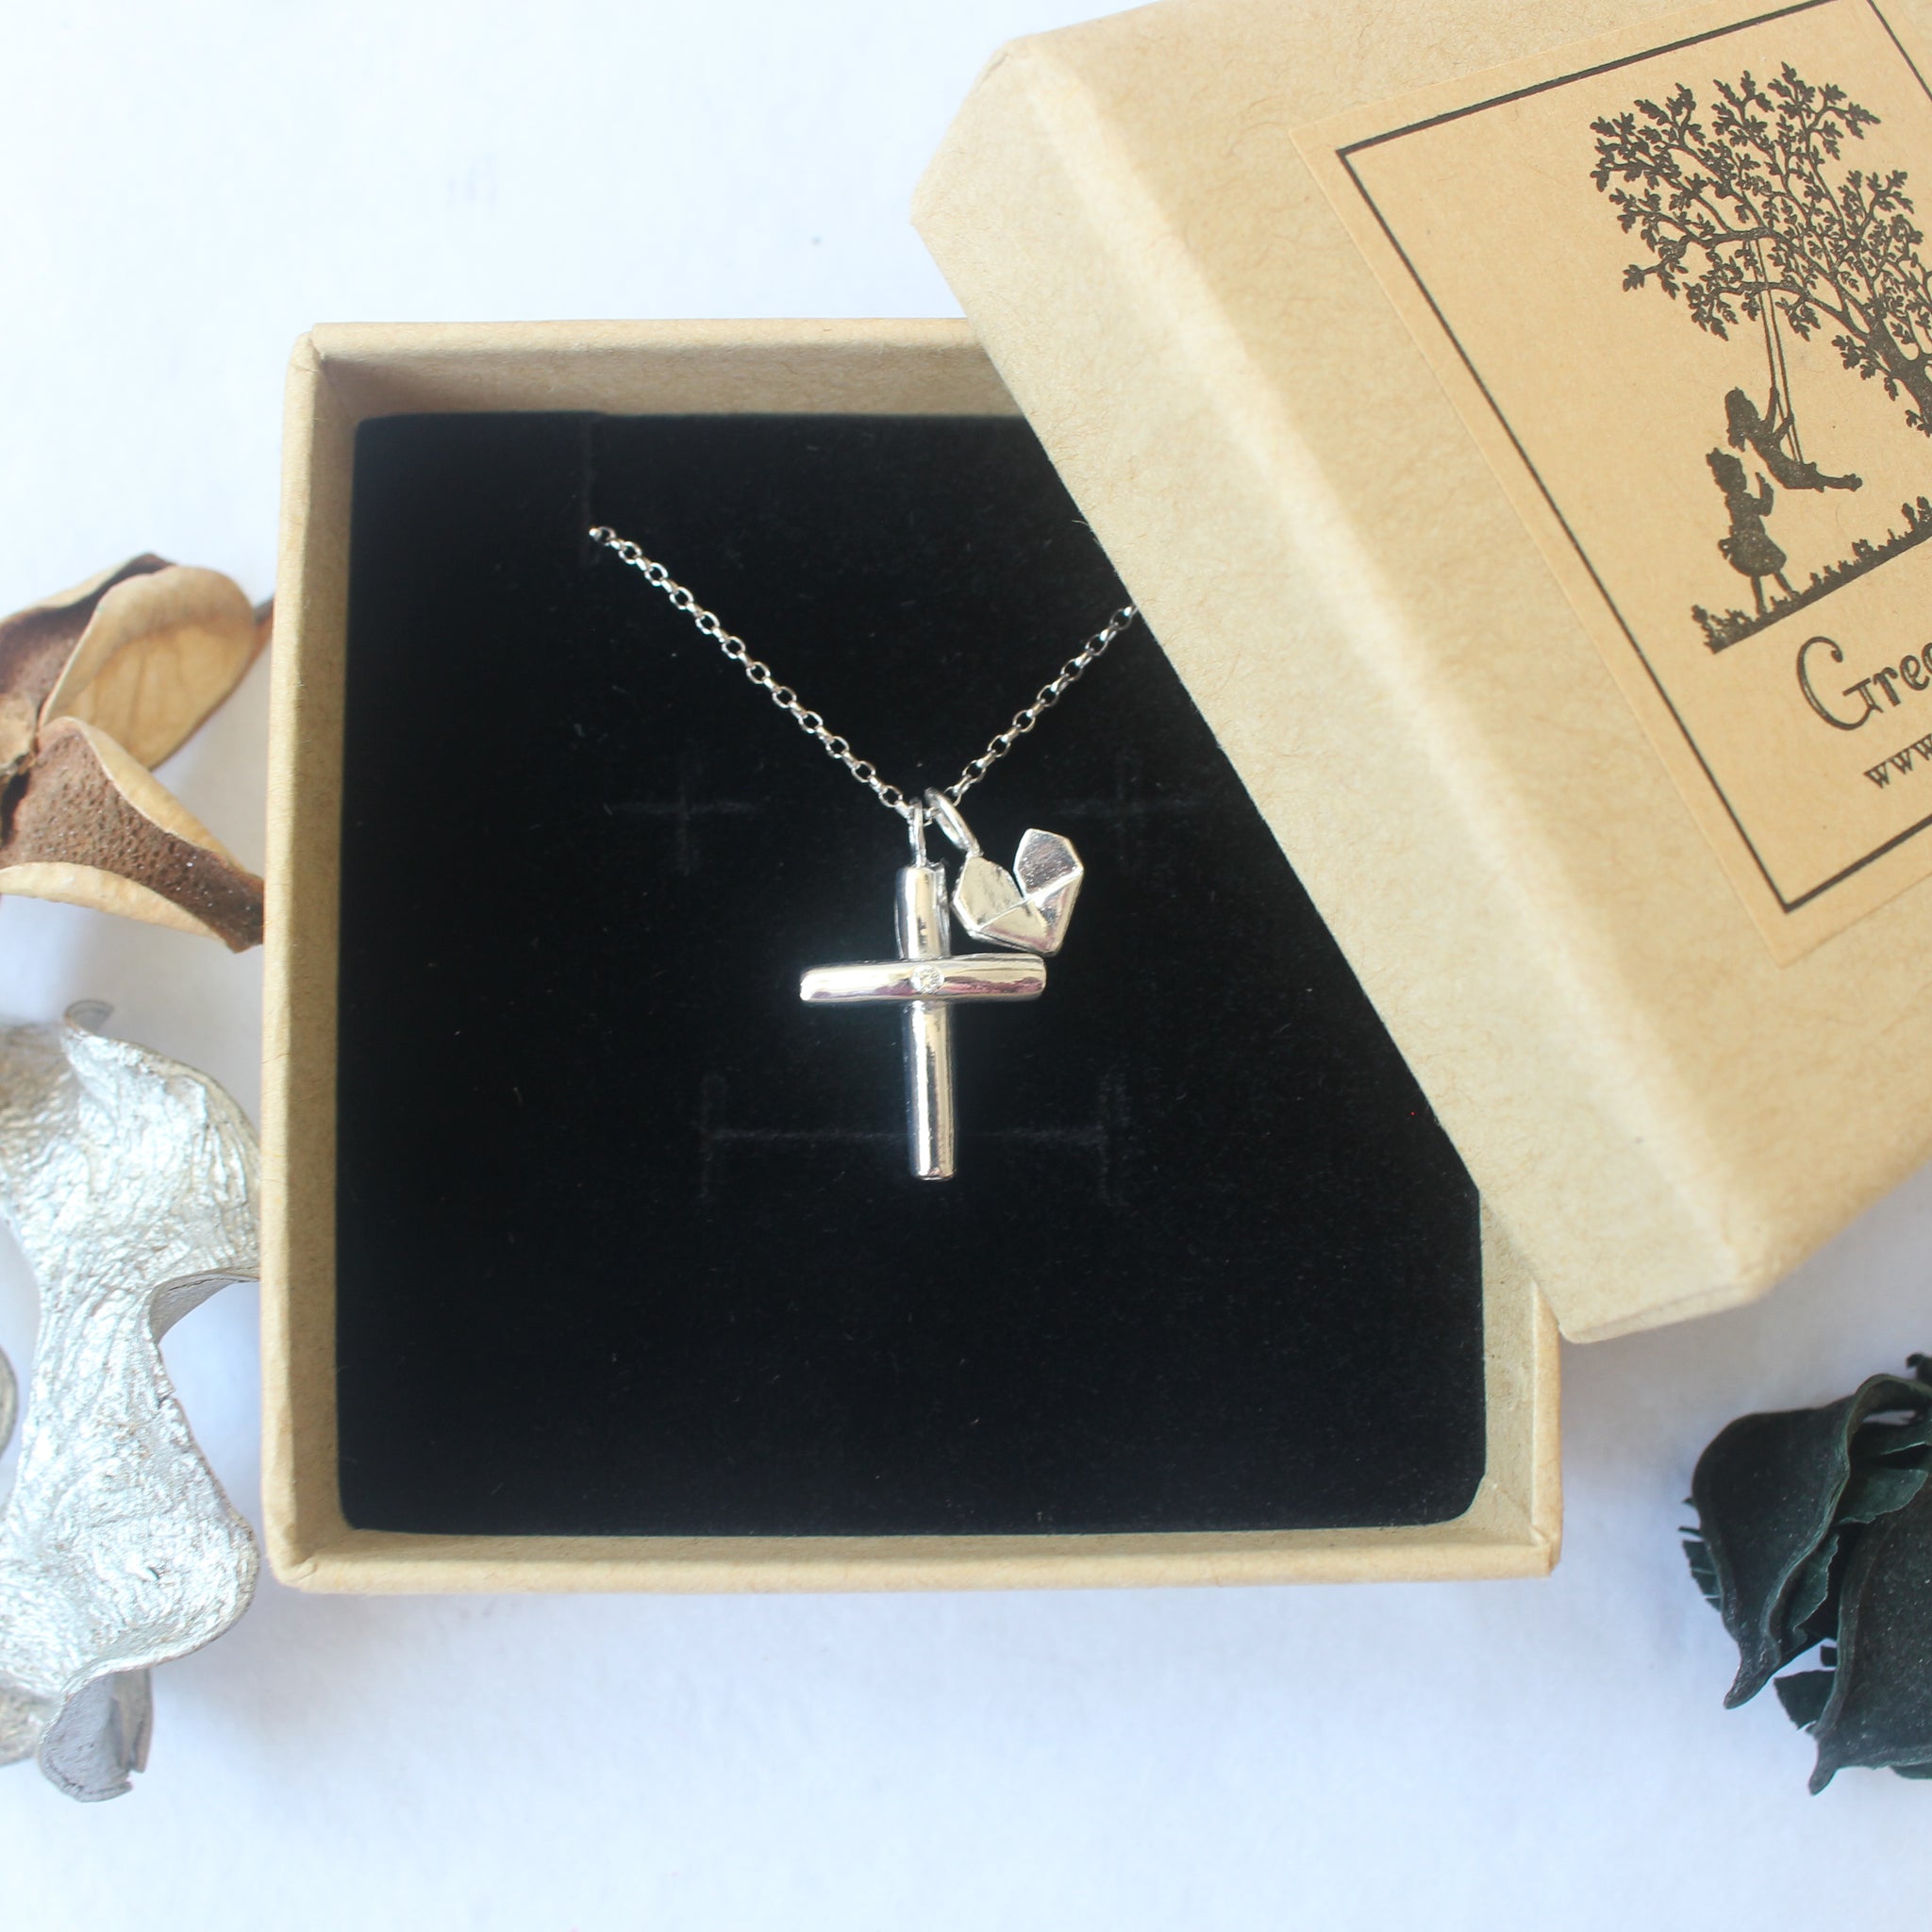 Cross with Heart - Sterling Silver Diamond Cross Necklace (Small) Plain or Engraved with Silver Origami Heart